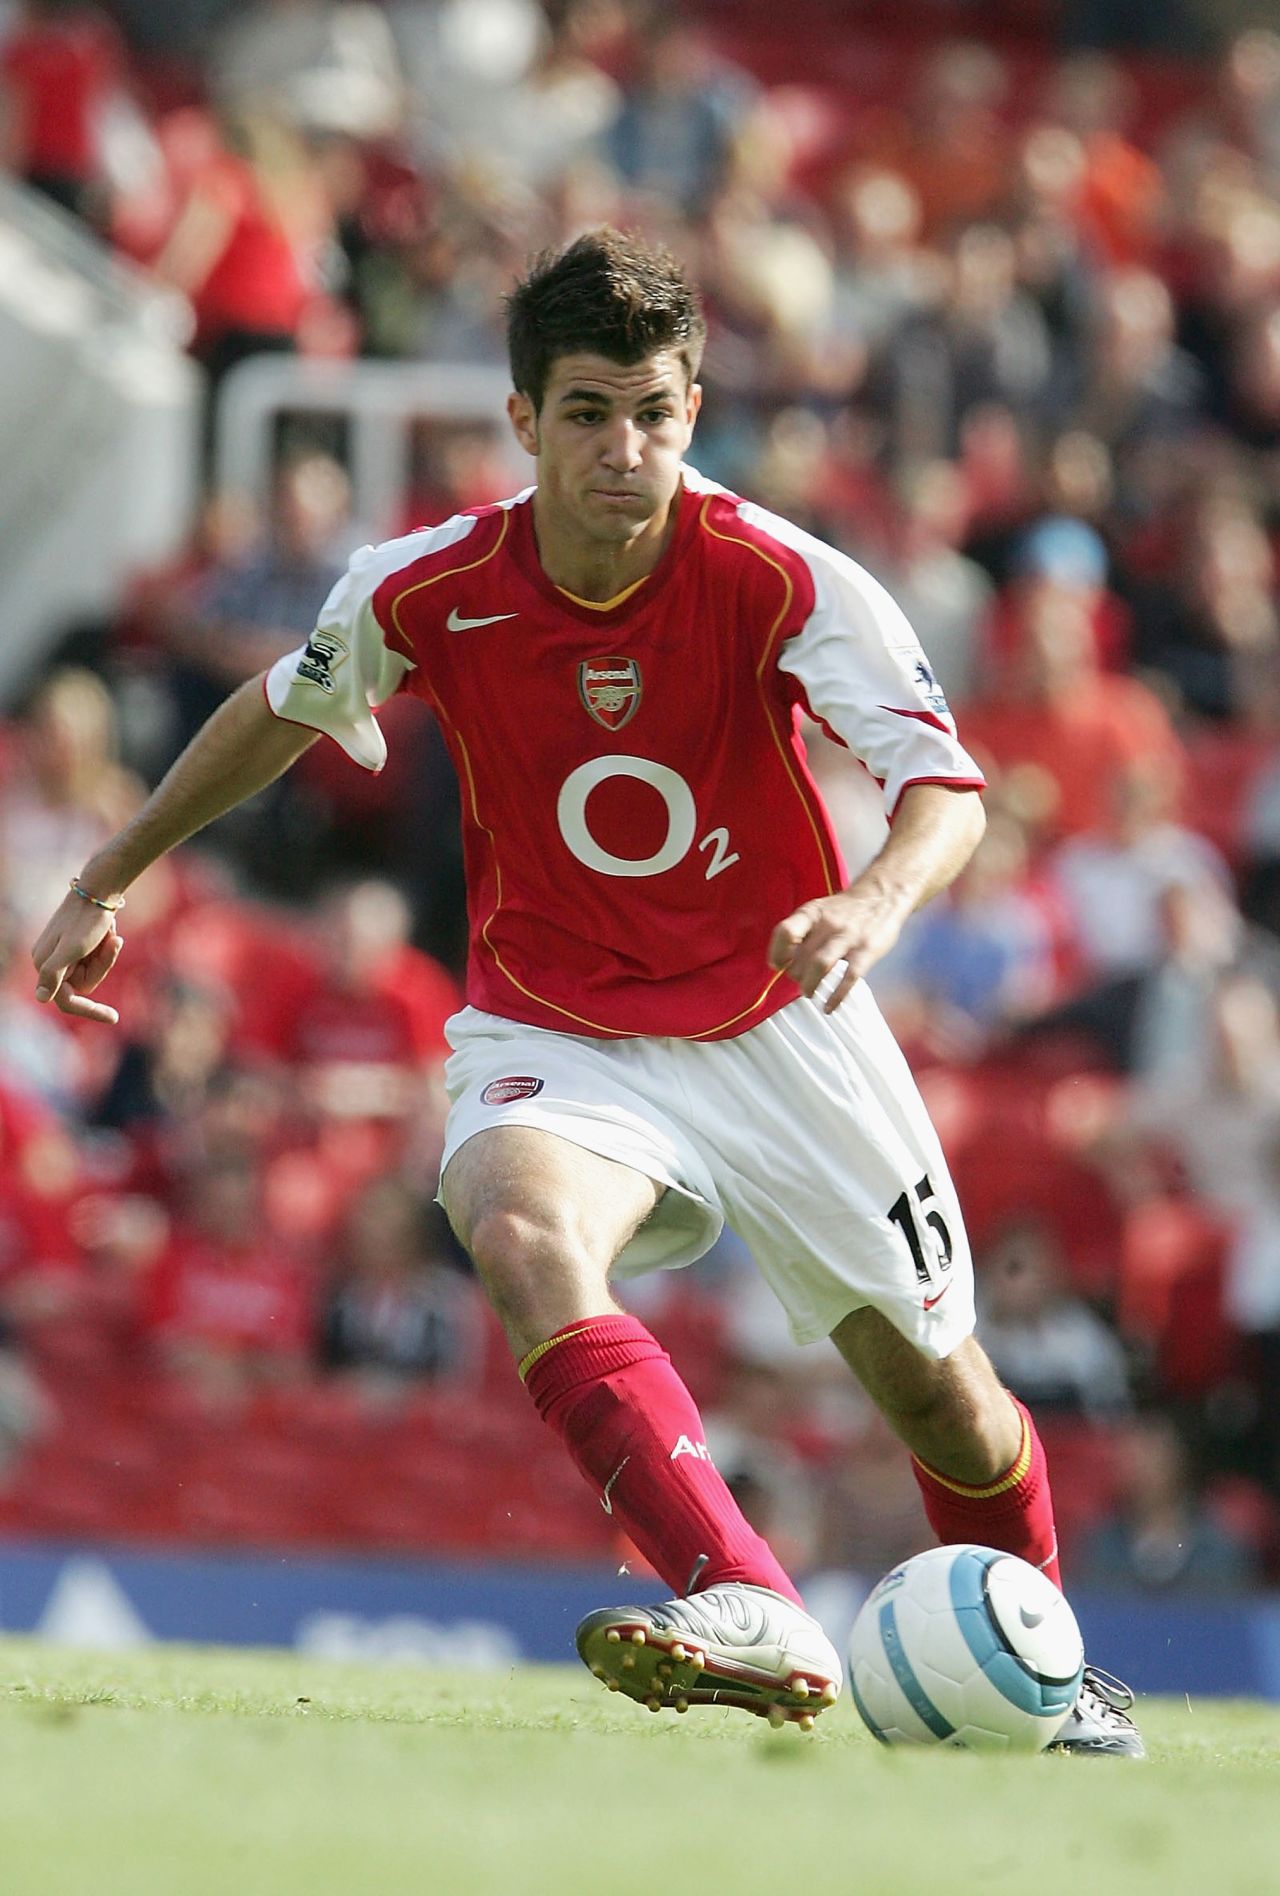 Cesc Fabregas made his Arsenal debut at 16, which would not have been possible if not for a loophole that allows EU citizens to transfer within its member states from that age. Normal FIFA rules stipulate that a player must be 18 to move, unless his parents accompany him for non-football related reasons. 